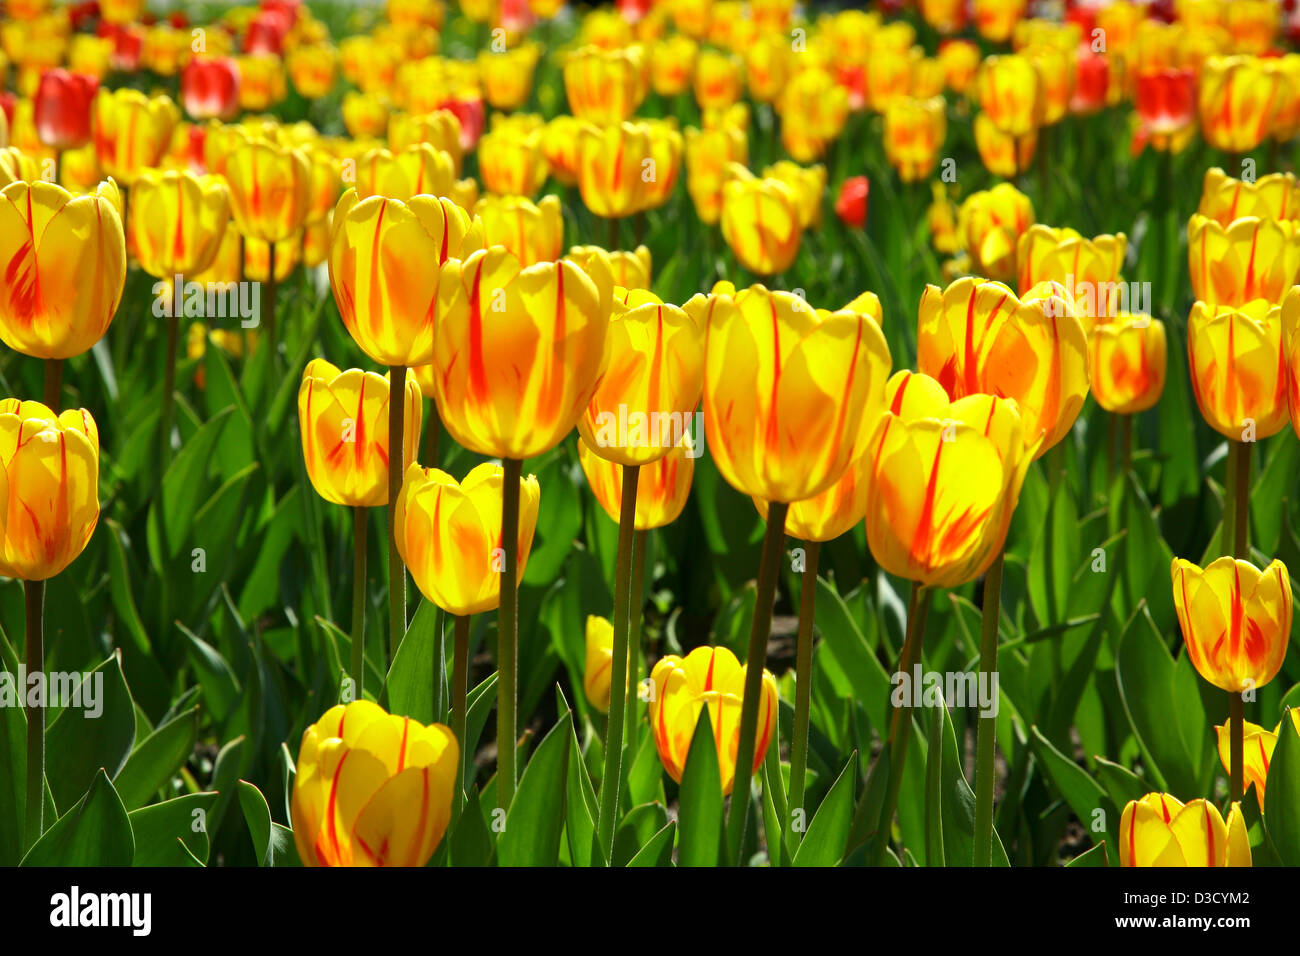 Field of yellow spring tulips in sunlight Stock Photo